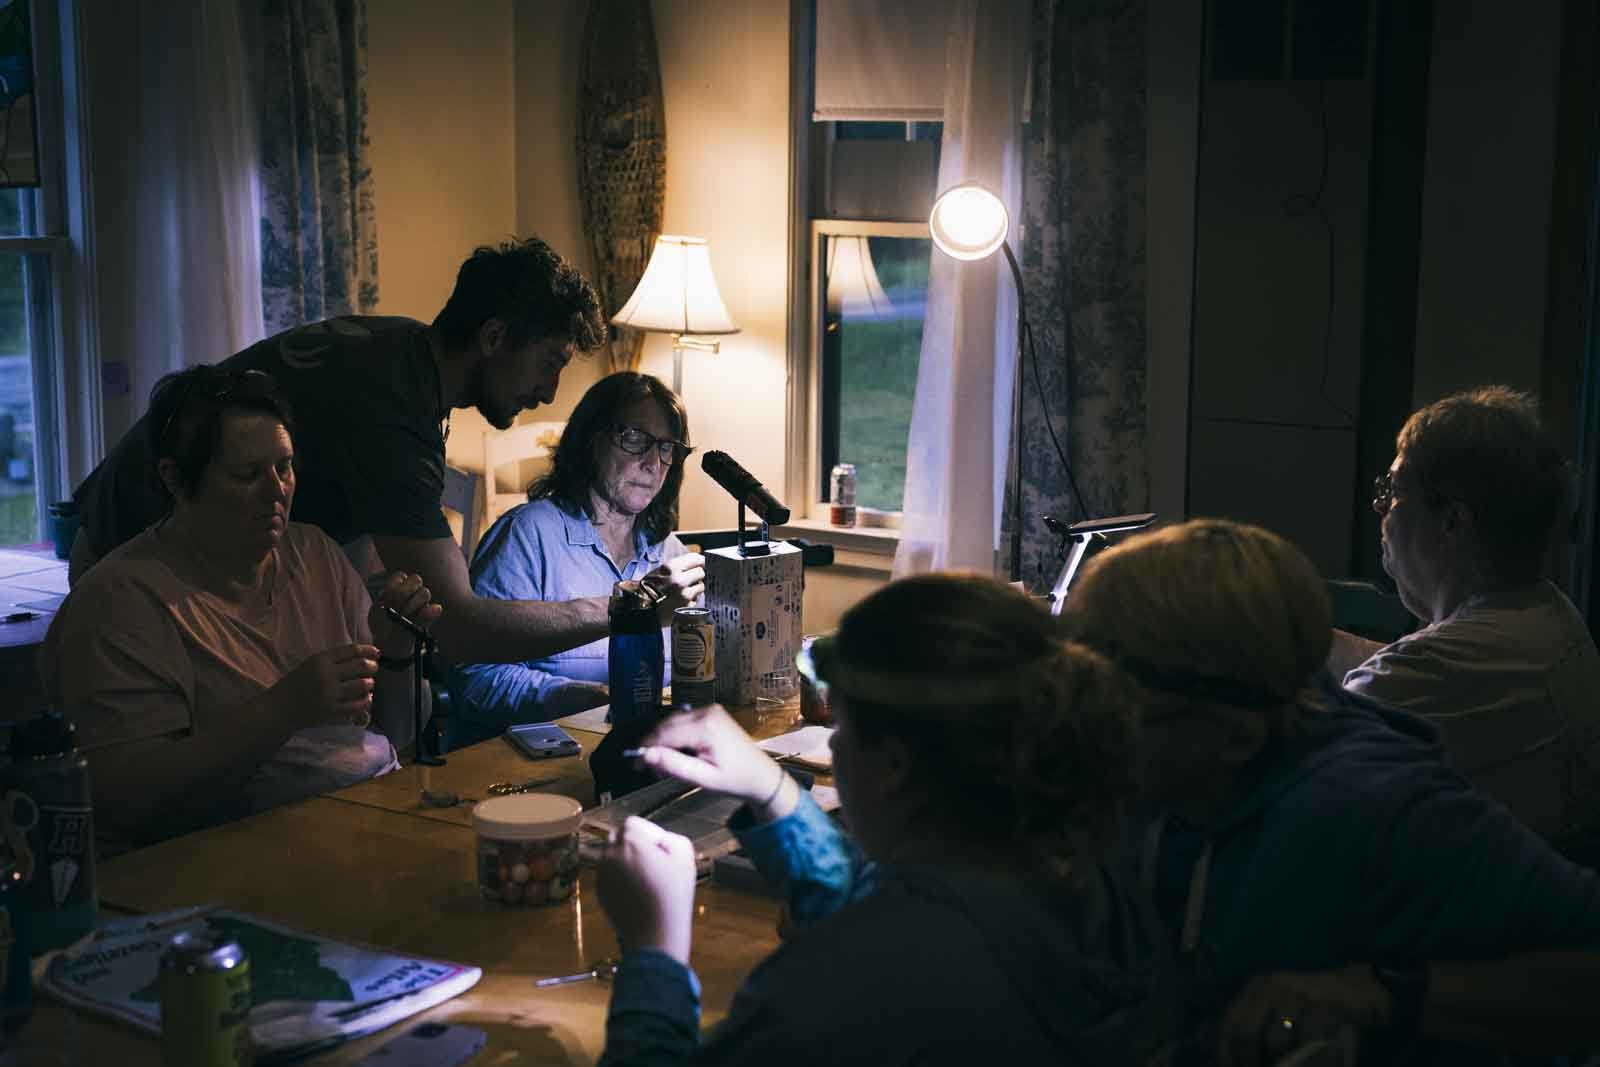  Dom (he/him) guides campers by lamp light through fly tying patterns, gathered around a large table at Evan’s Notch Lodge. Photo:  Joe Klementovich  